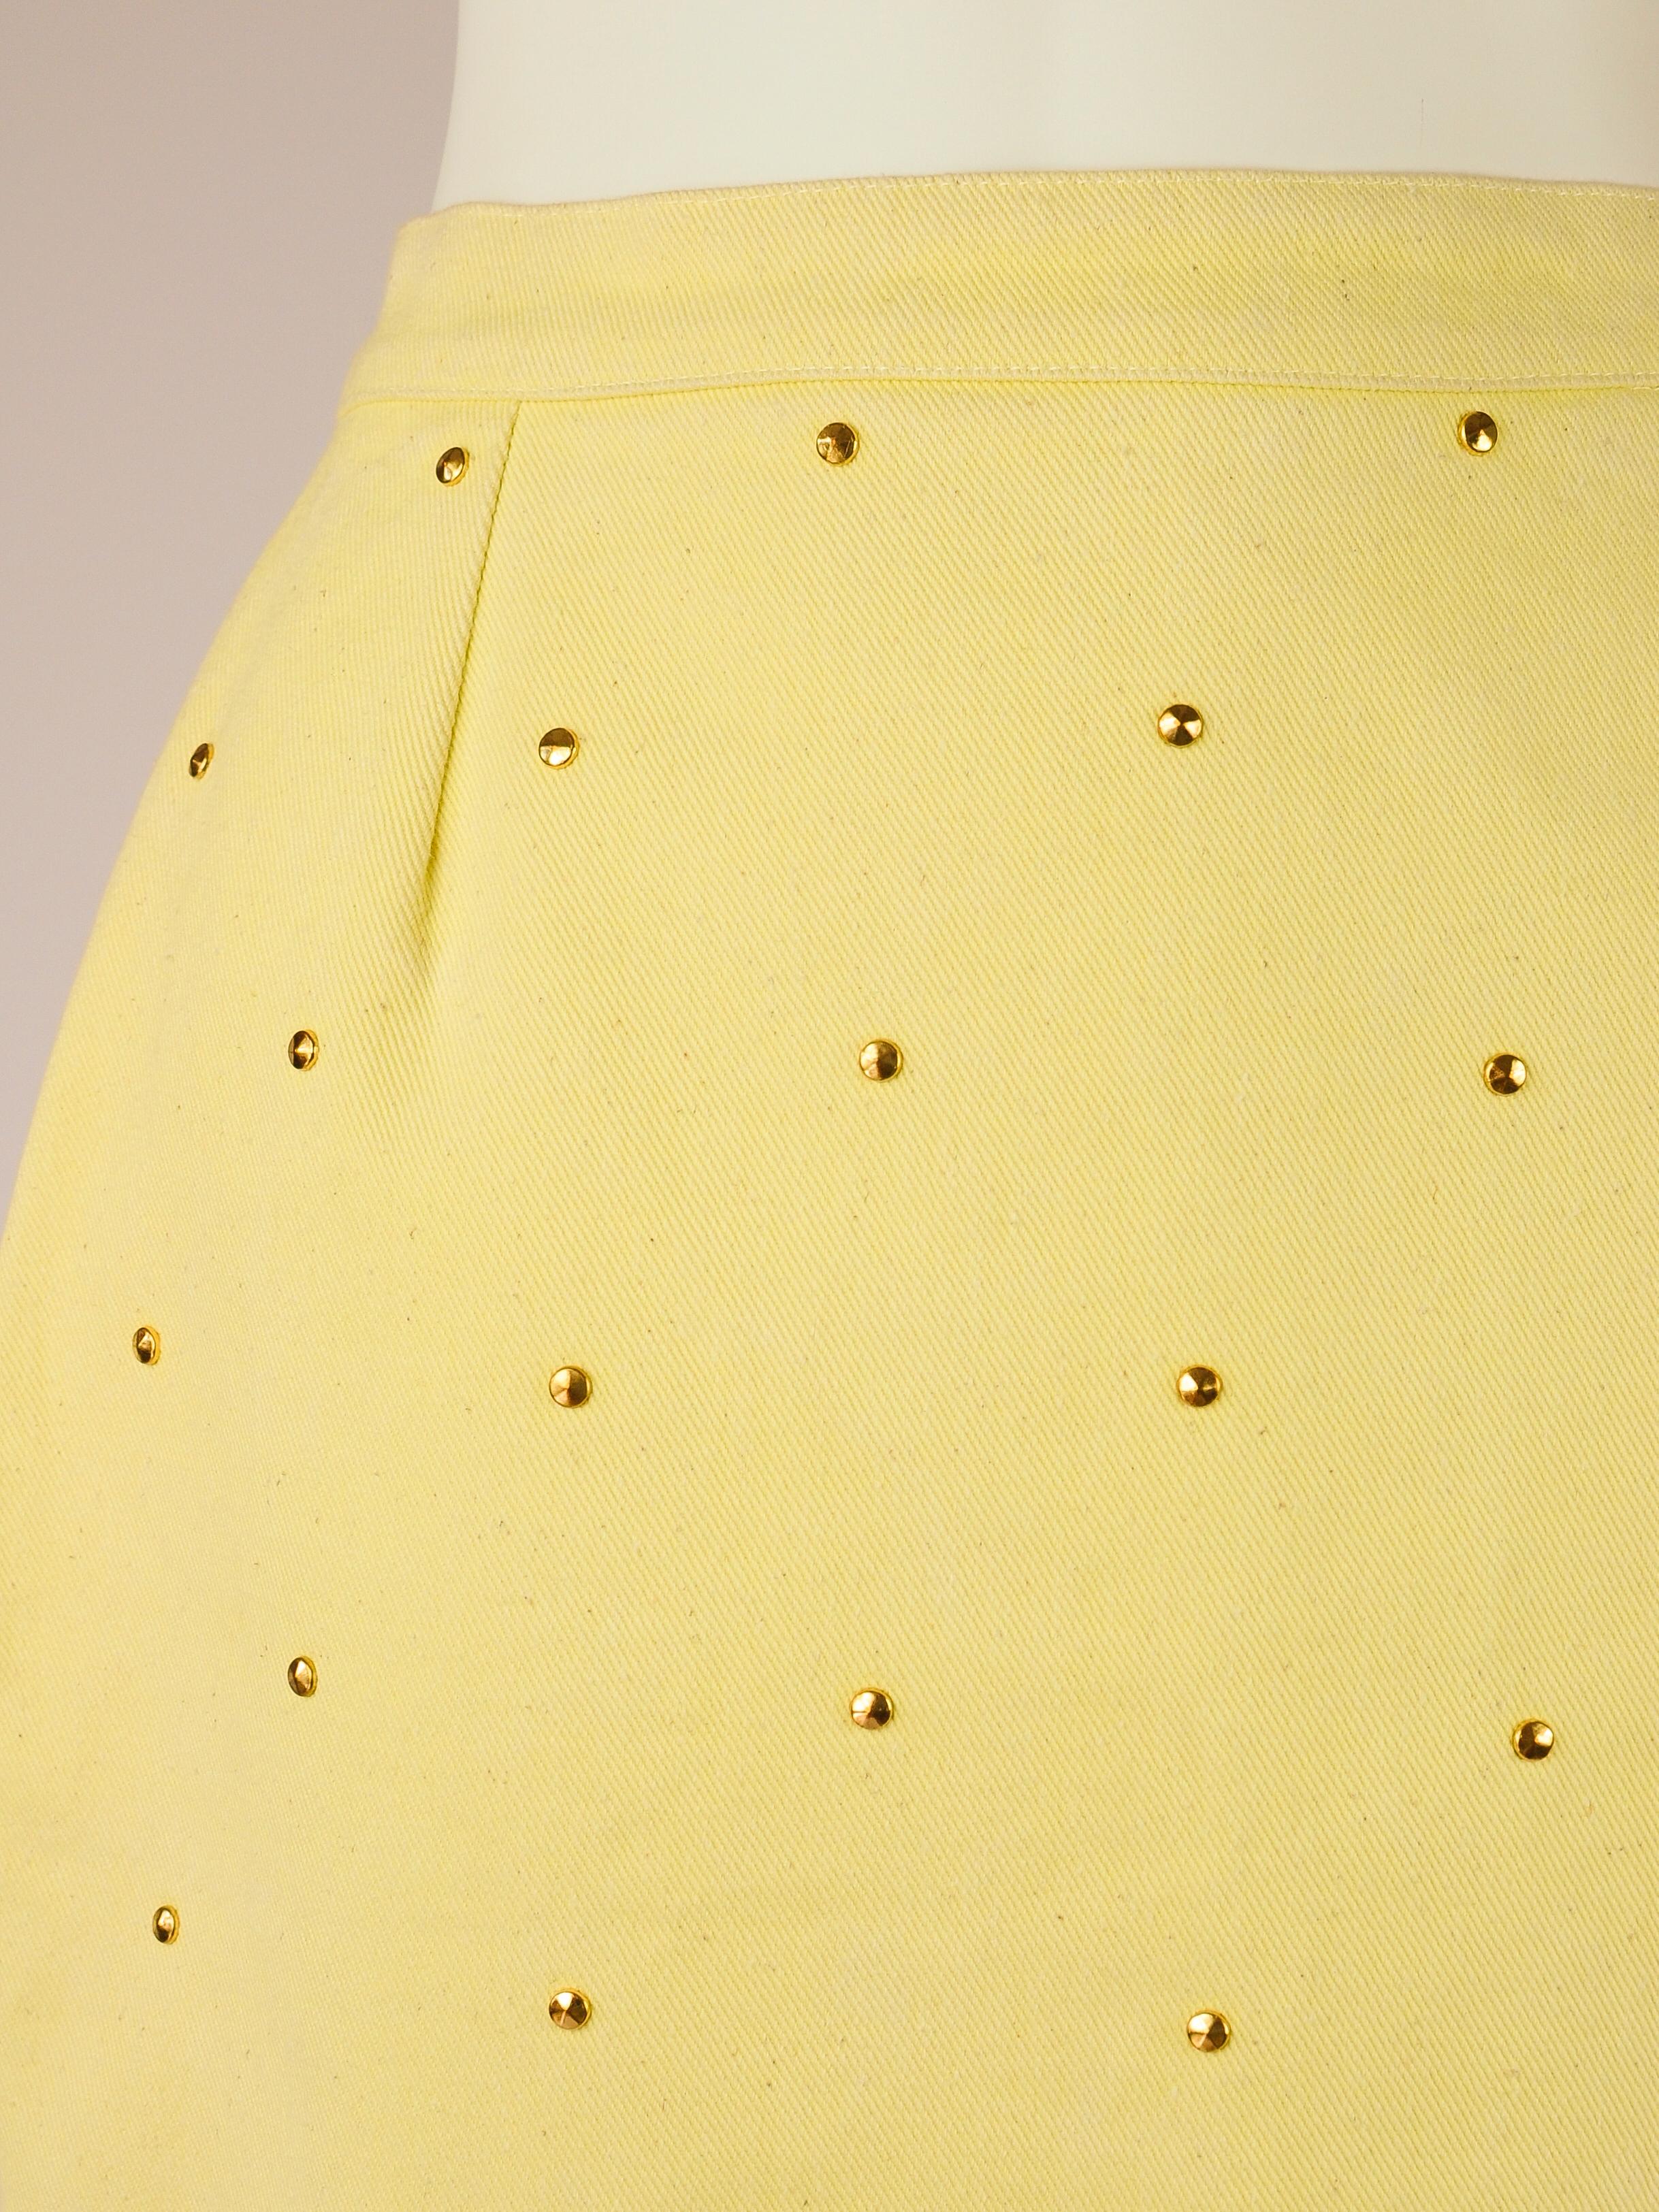 Mini skirt by the LV Sportswear 1980s diffusion line from Louis Vuitton in a fresh lemon yellow with golden stud embellishment. It features a size zipper and a LV embossed stud shaped button on the left side. 

BRAND DESCRIPTION
LV Sportswear was